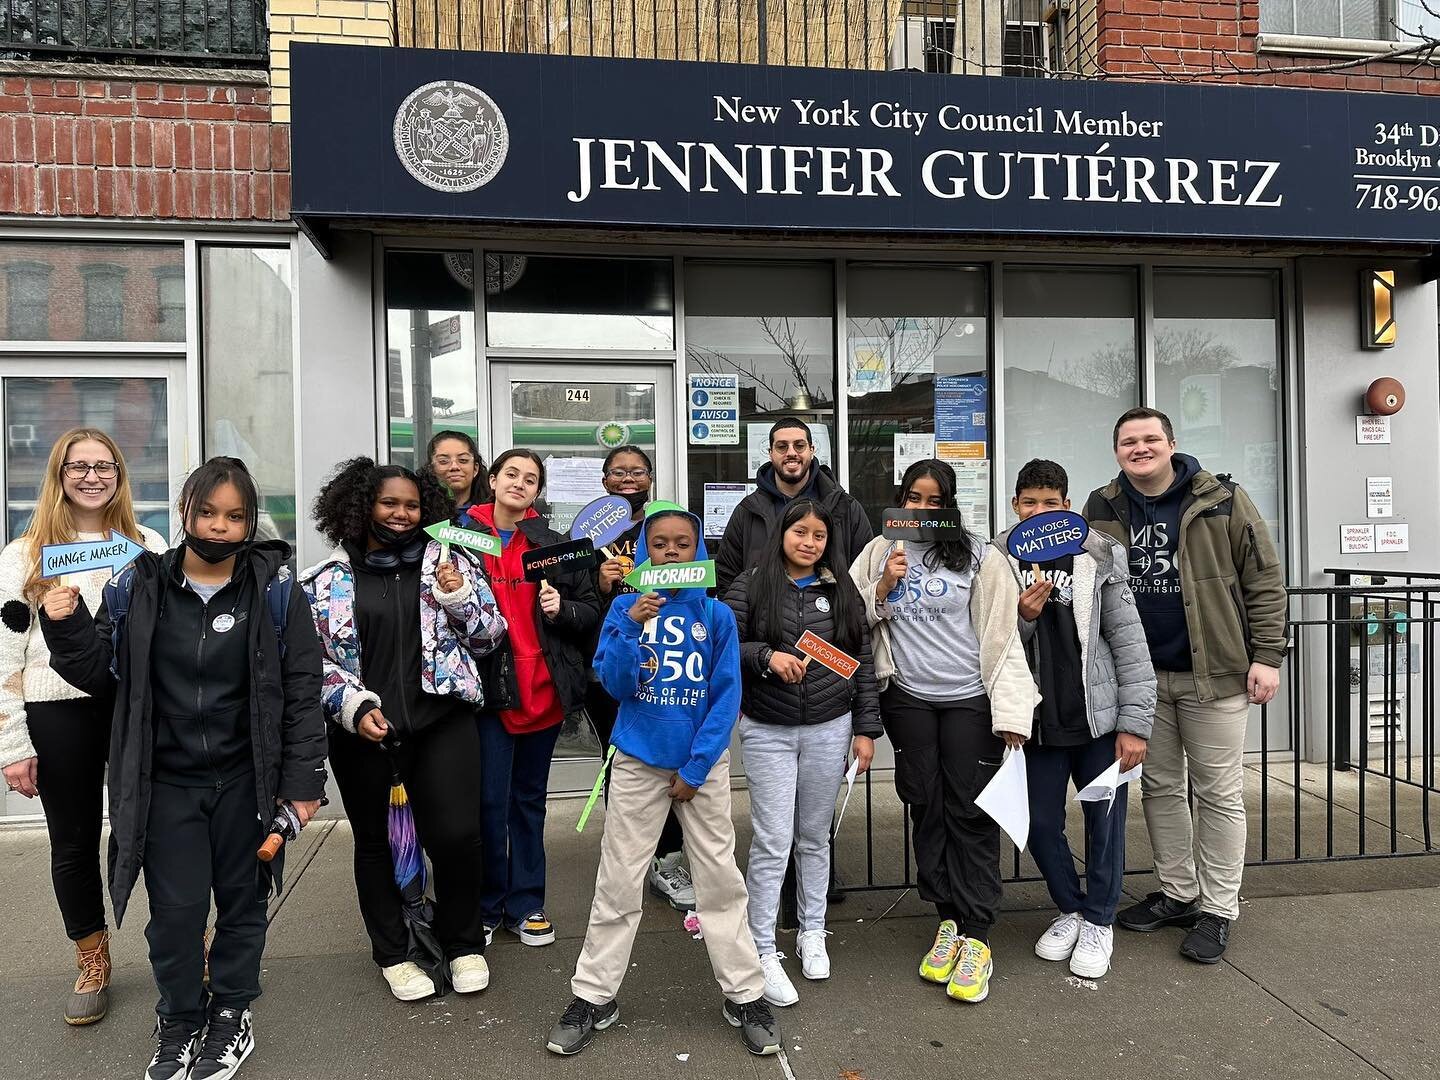 During Civics for All week, our students used a letter writing campaign to advocate for educational and enrichment spaces at school.  They were thrilled to be invited to
@cmjengutierrez &lsquo;s office to present their ideas.  #civicsweek #advocacy #